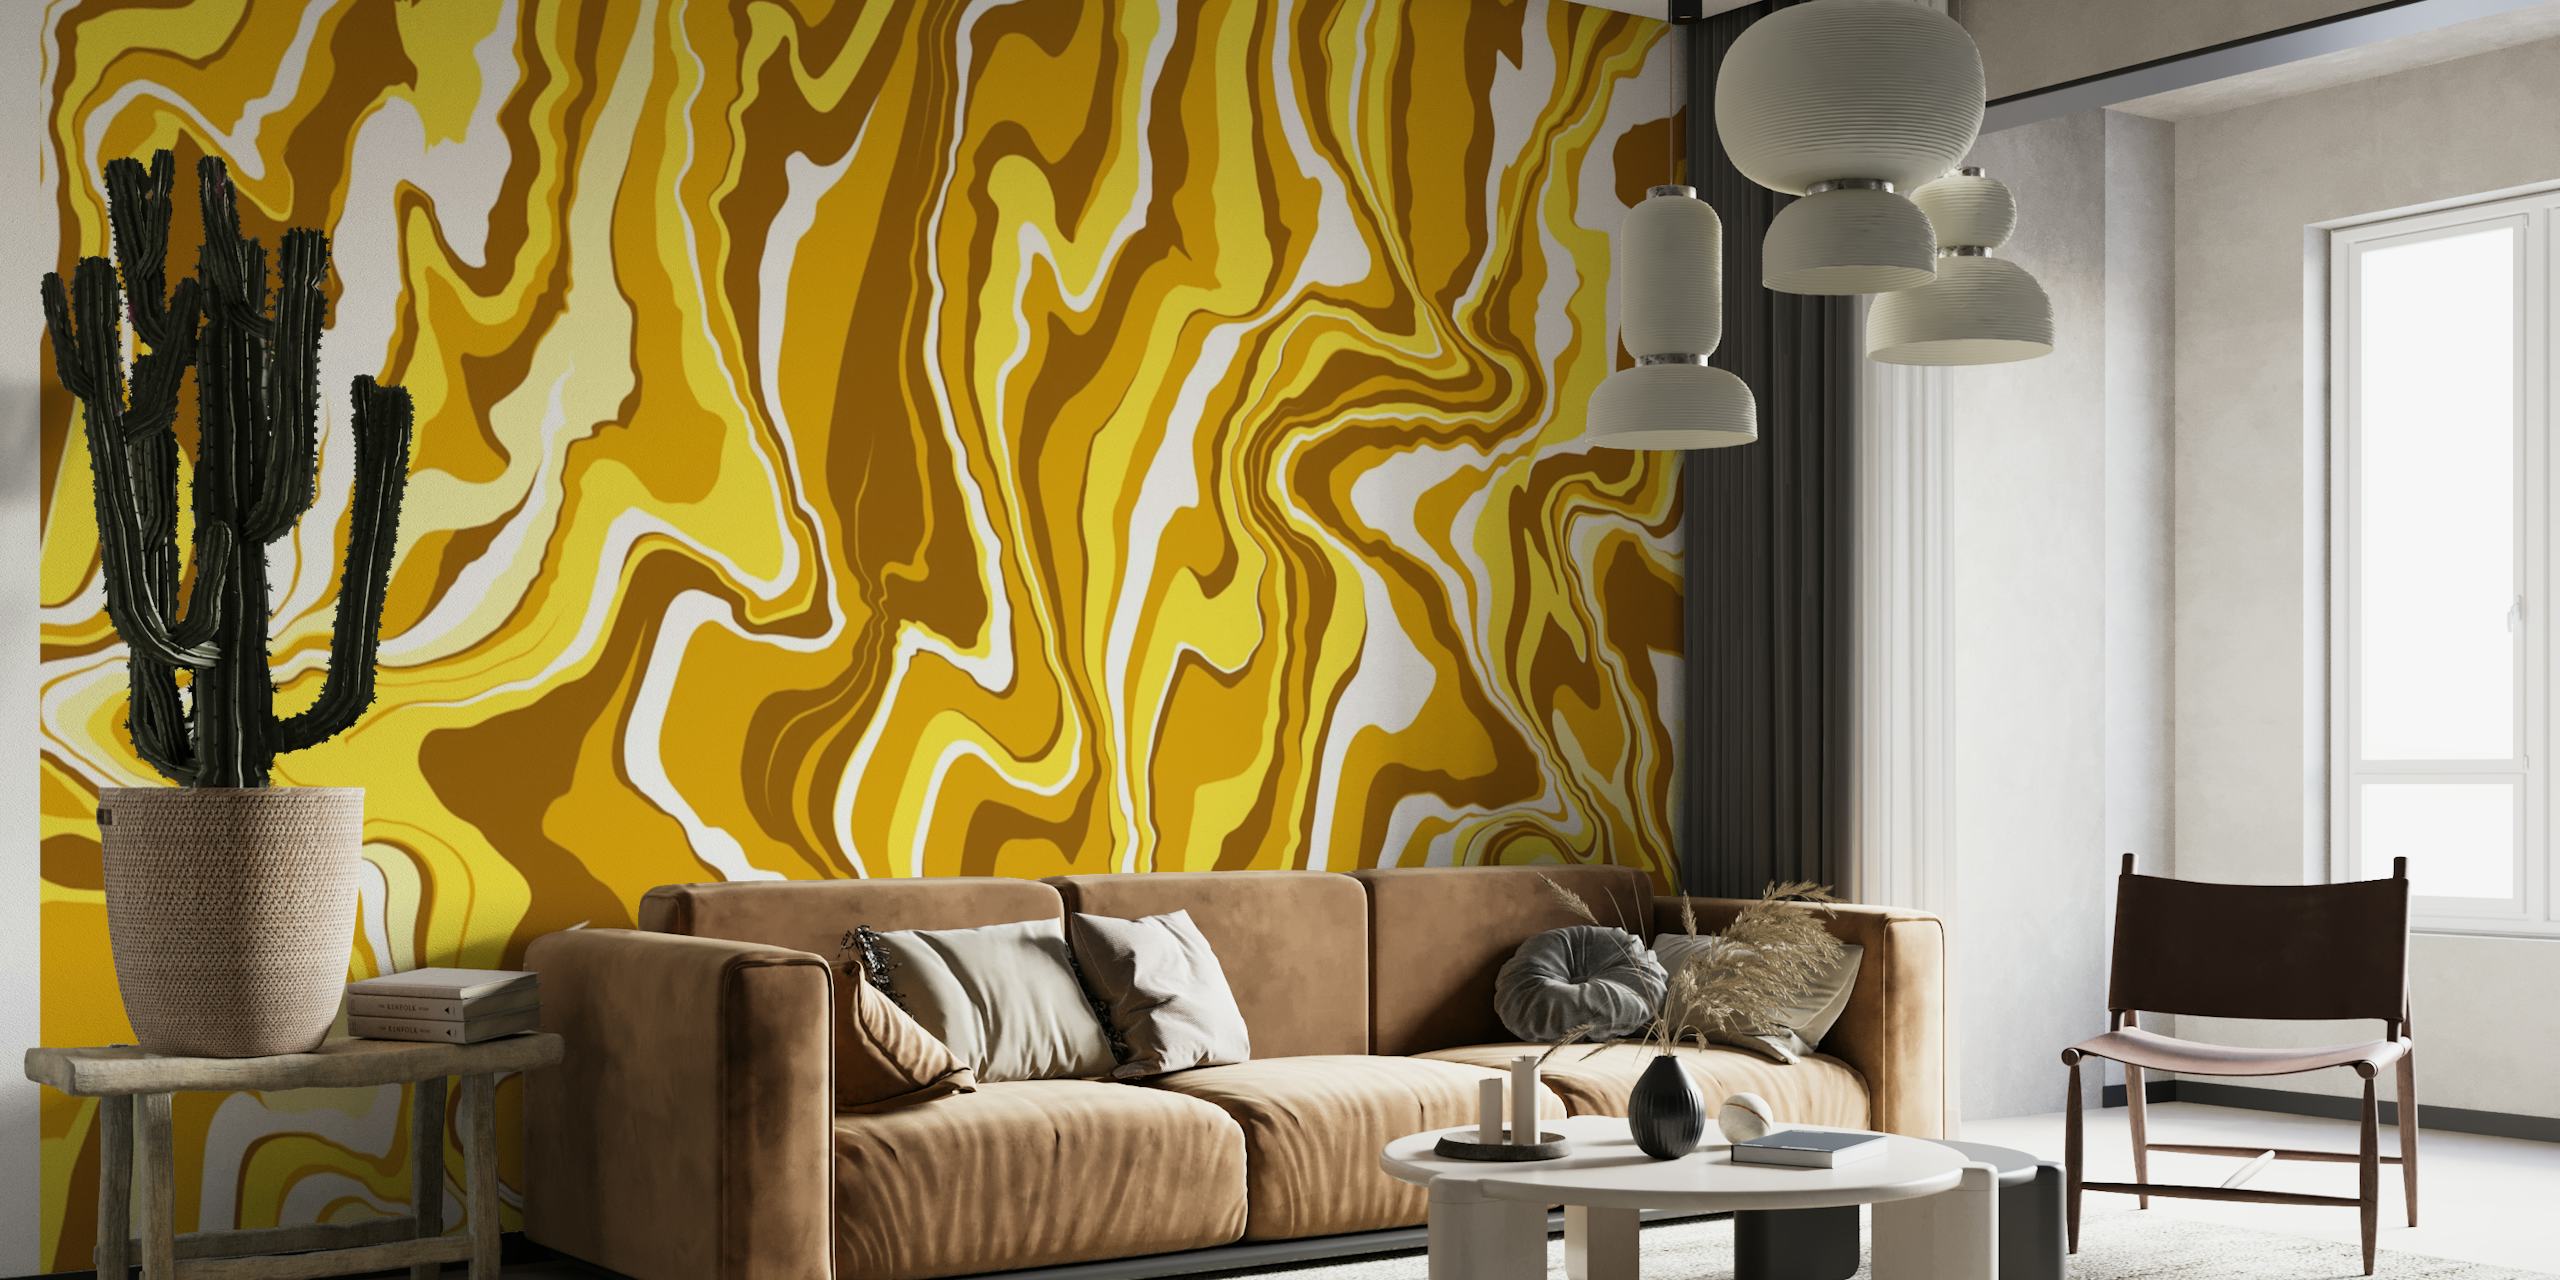 Fluid Art 4 wall mural with golden swirls and flowing abstract design